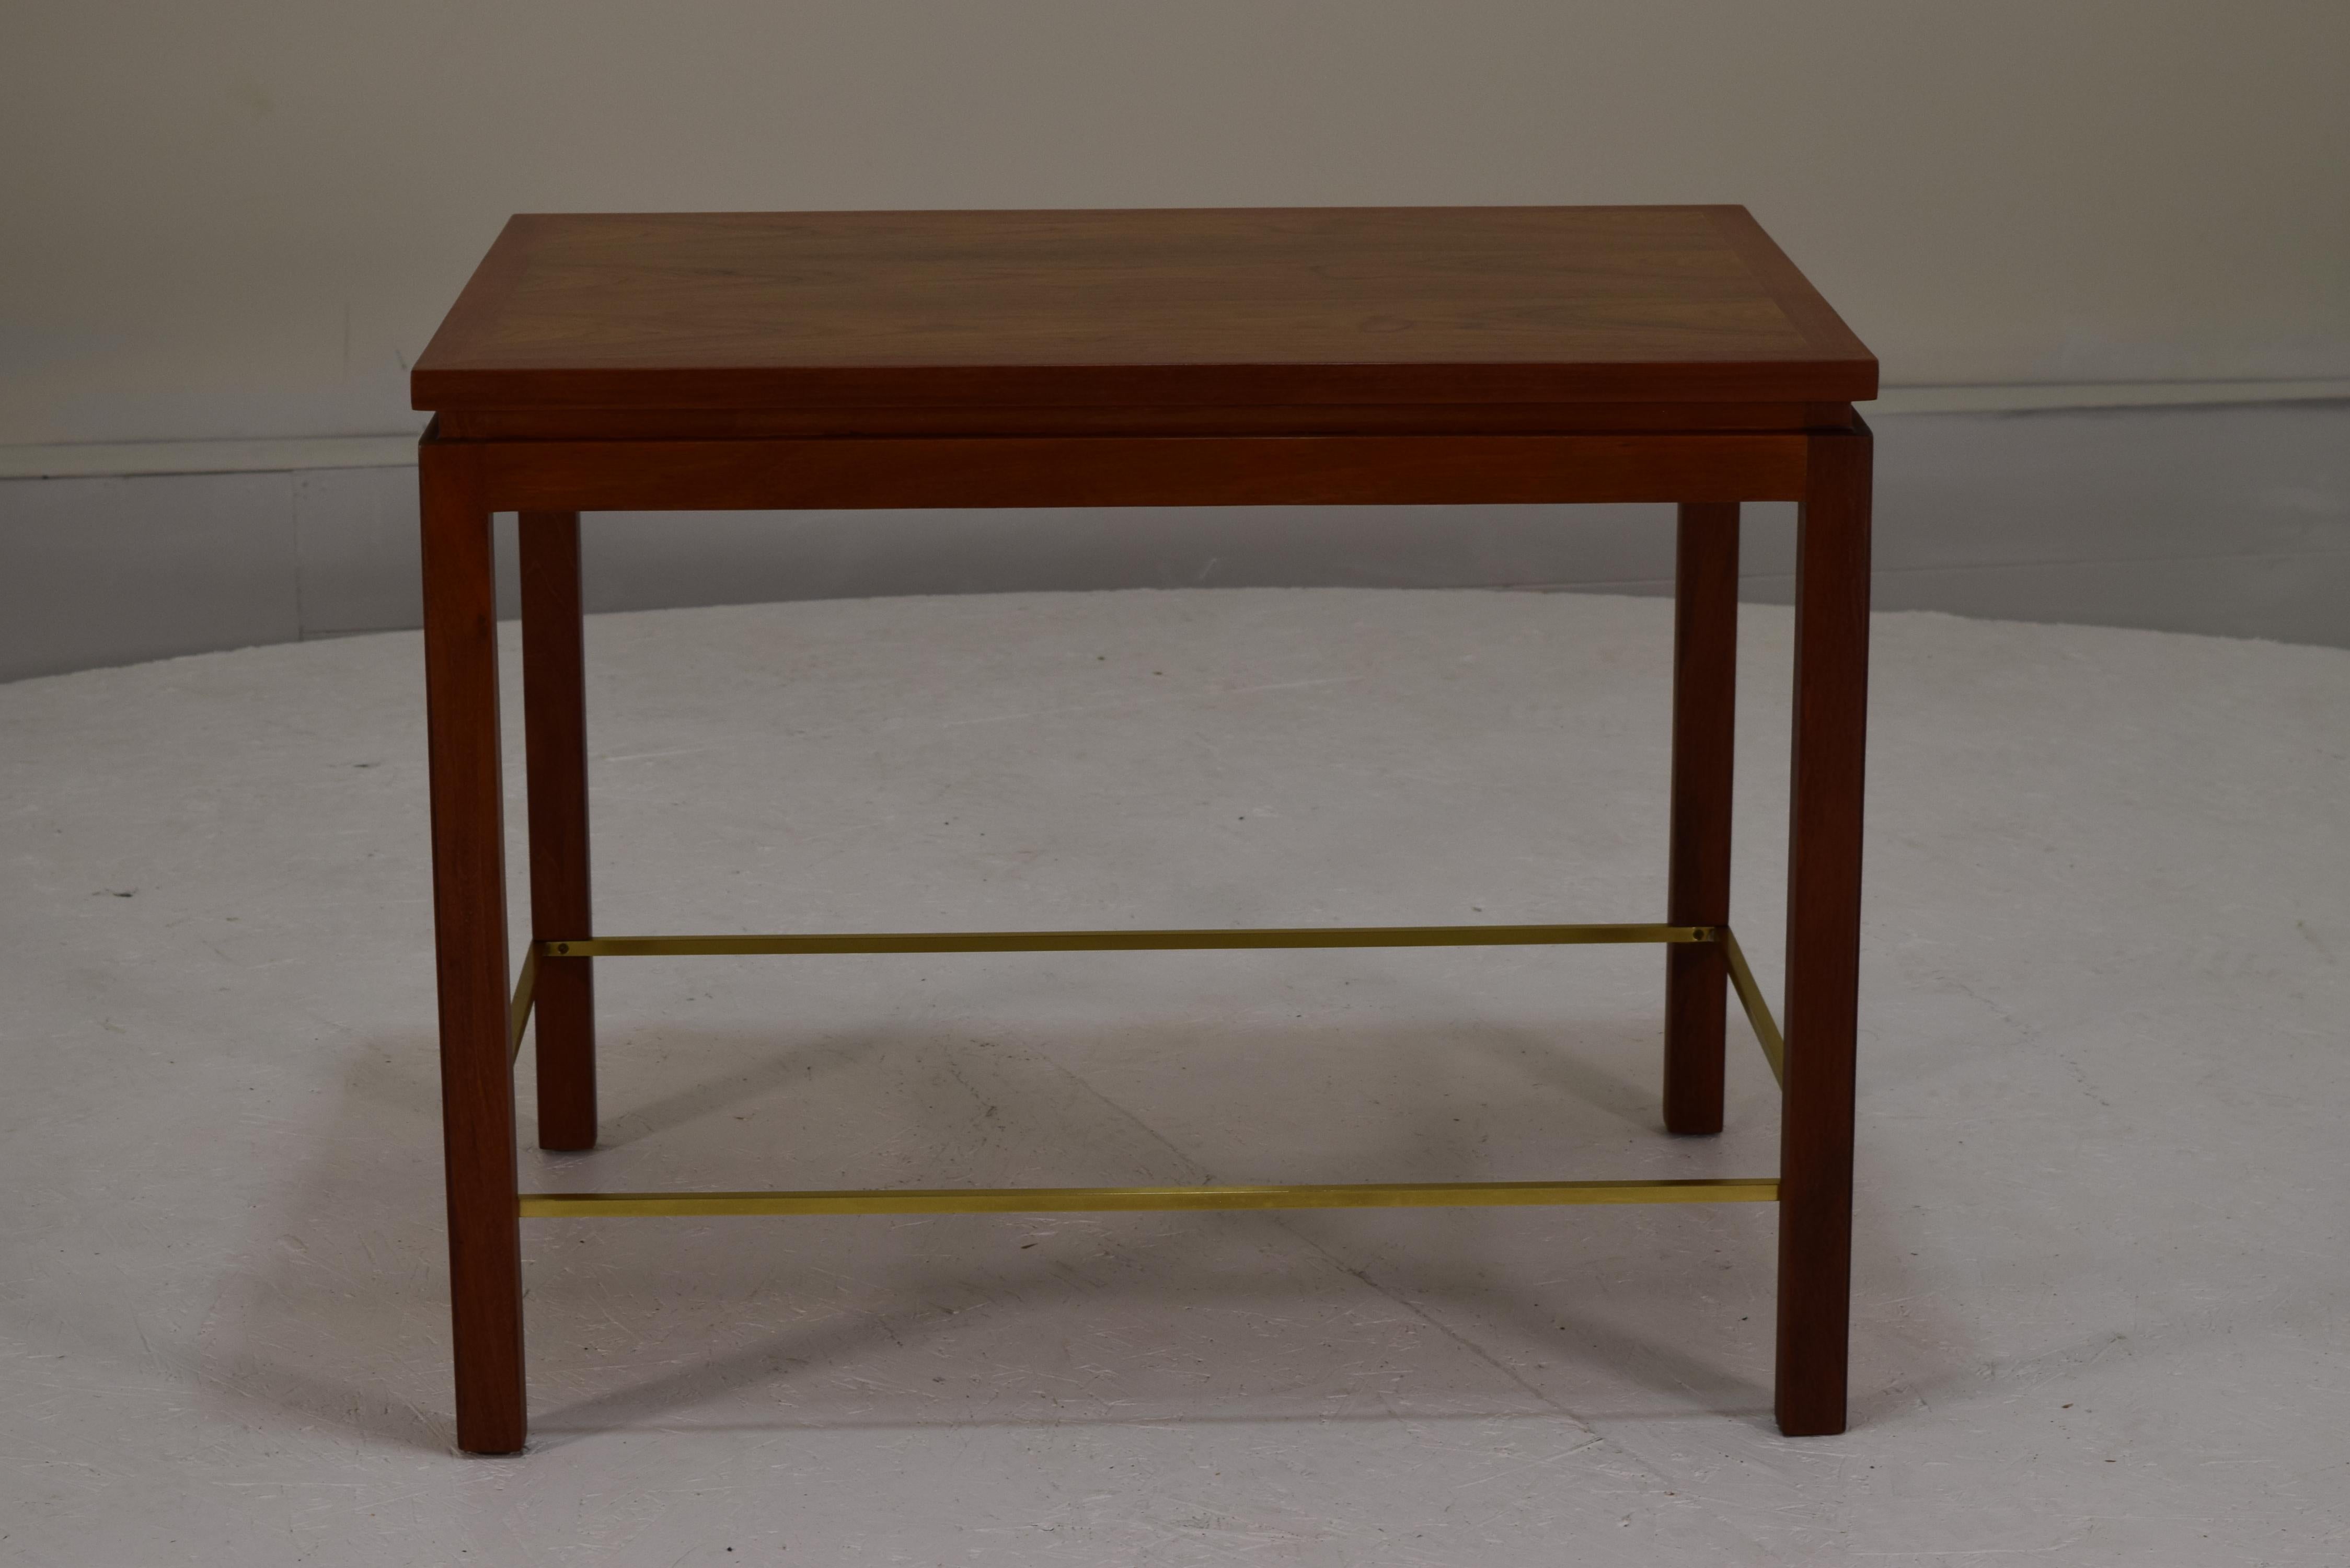 Refinished and like new.  Dunbar, Edward Wormley, USA, circa 1955, Mahogany, walnut, brass. 
Measures: 20 deep x 28 long and 22 inches tall
Solid mahogany lumber coupled with a walnut top framed in mahogany. Features a contiguous brass stretcher